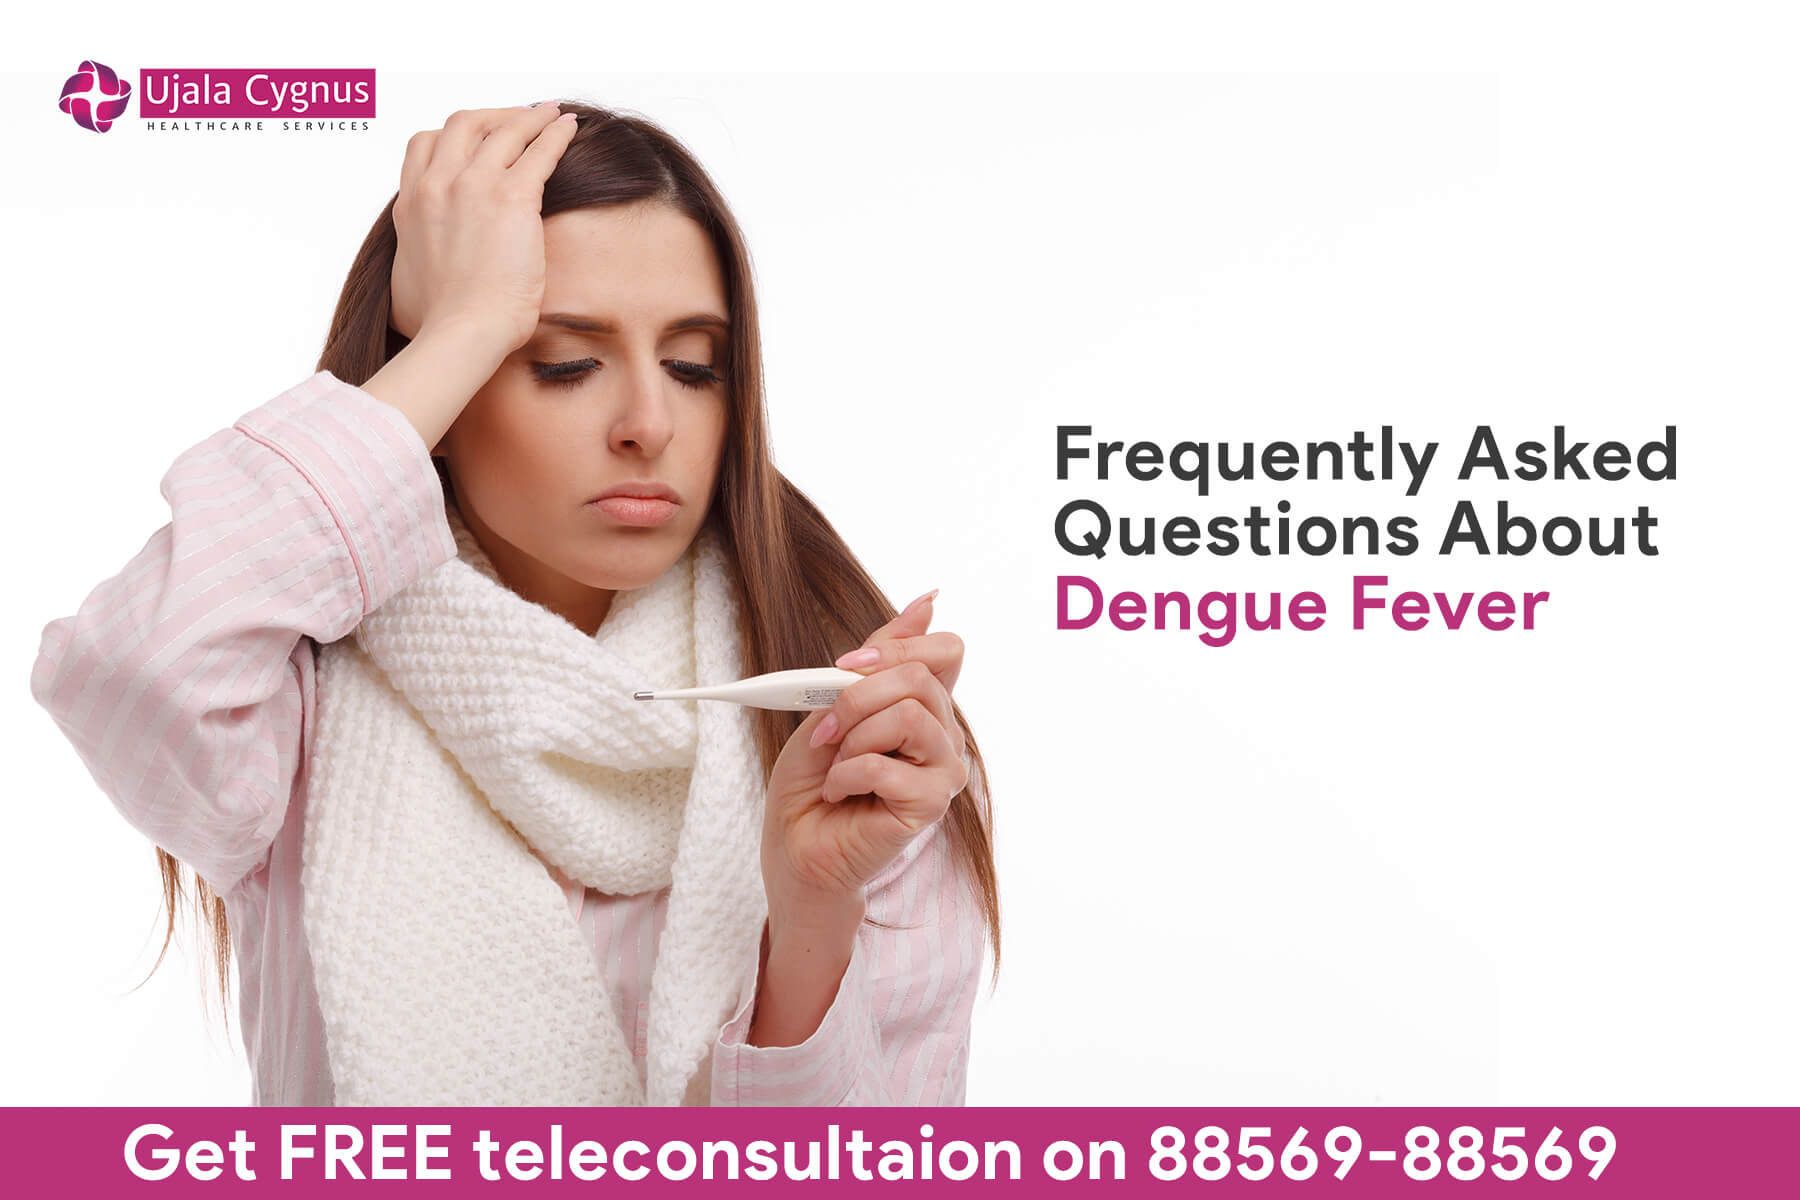 Frequently Asked Questions About Dengue Fever